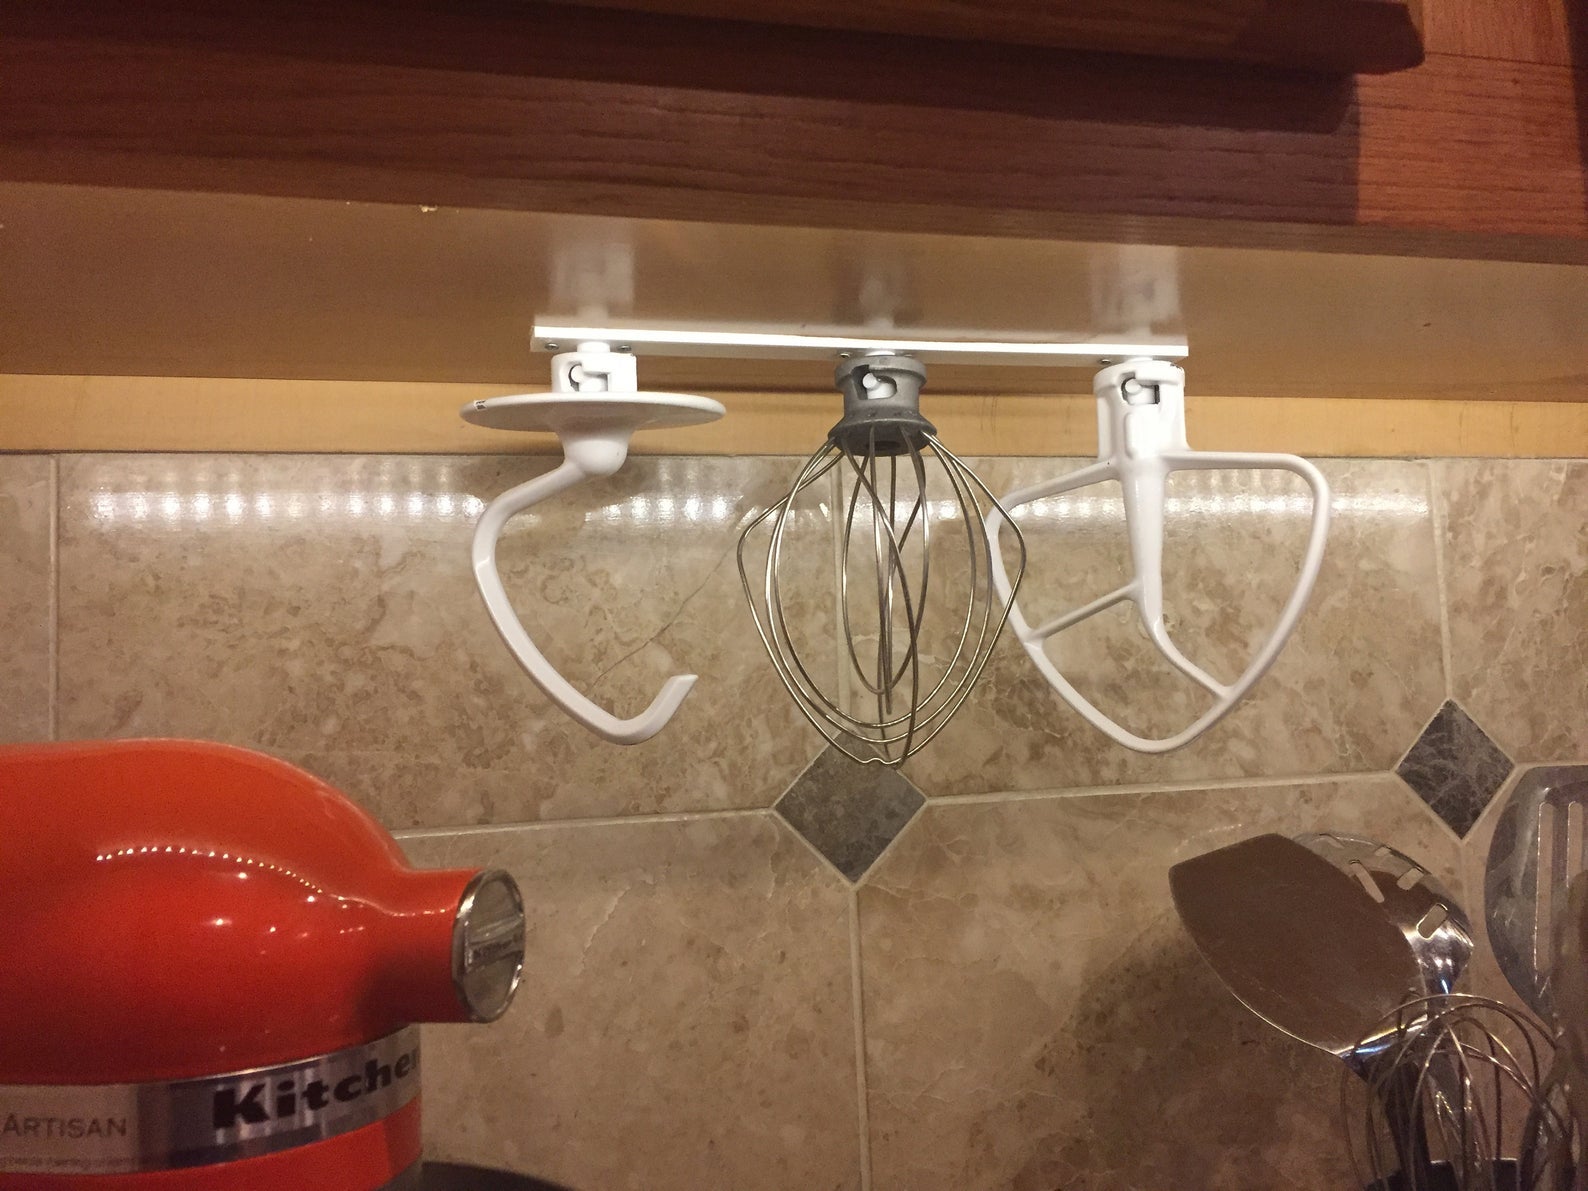 the attachment organizer hanging underneath a kitchen cabinet with three attachments on it